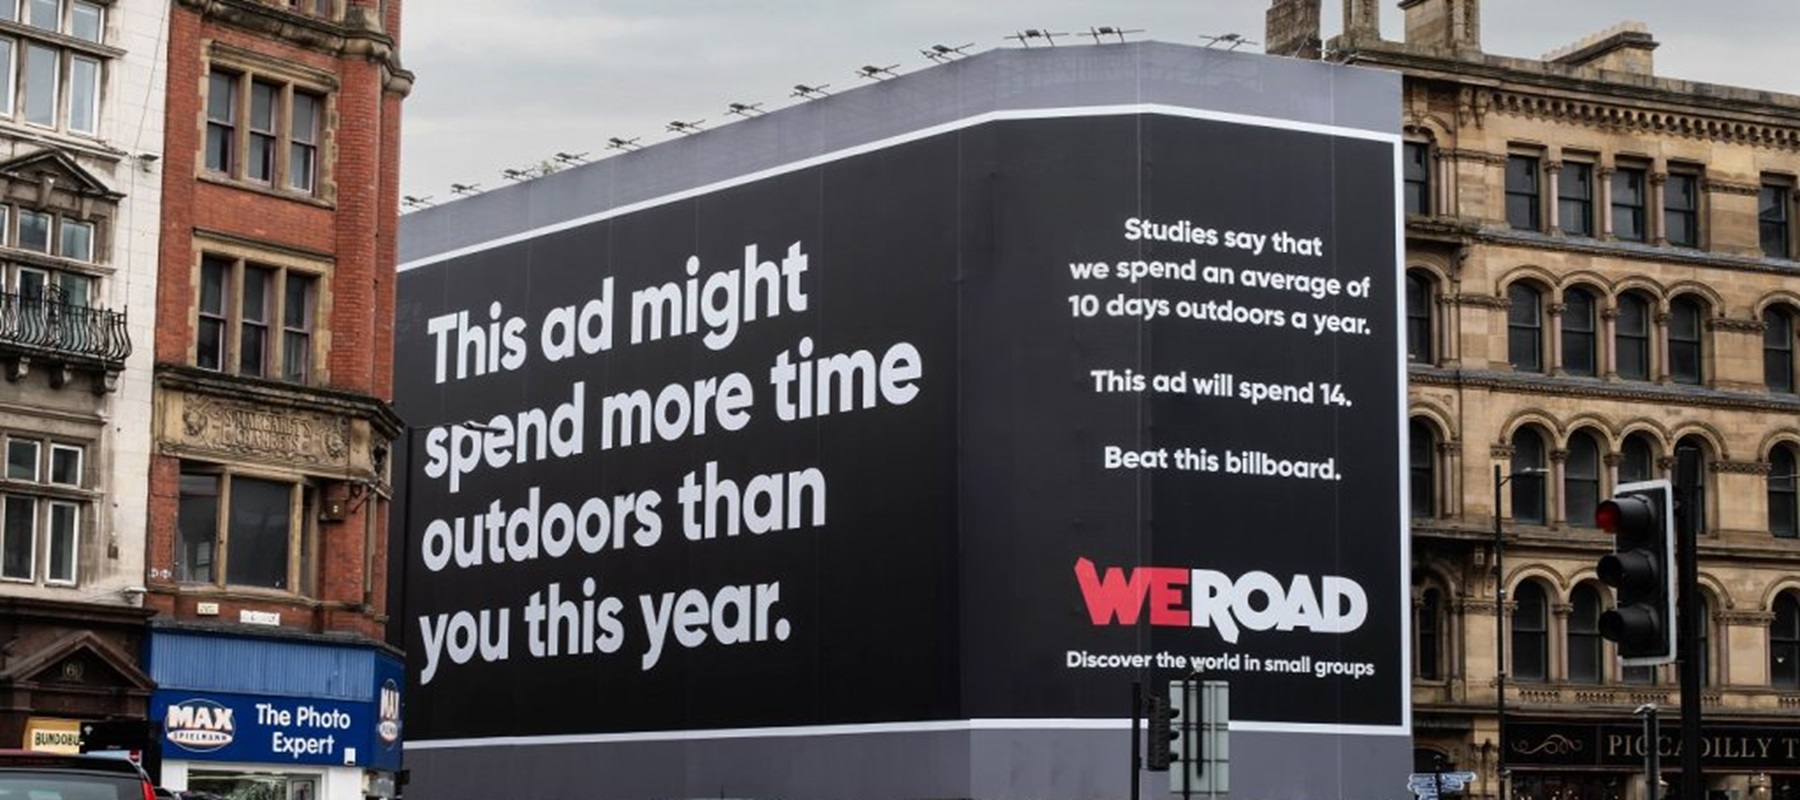 Travel brand WeRoad encourages residents of Manchester to spend more time outdoors with a giant billboard